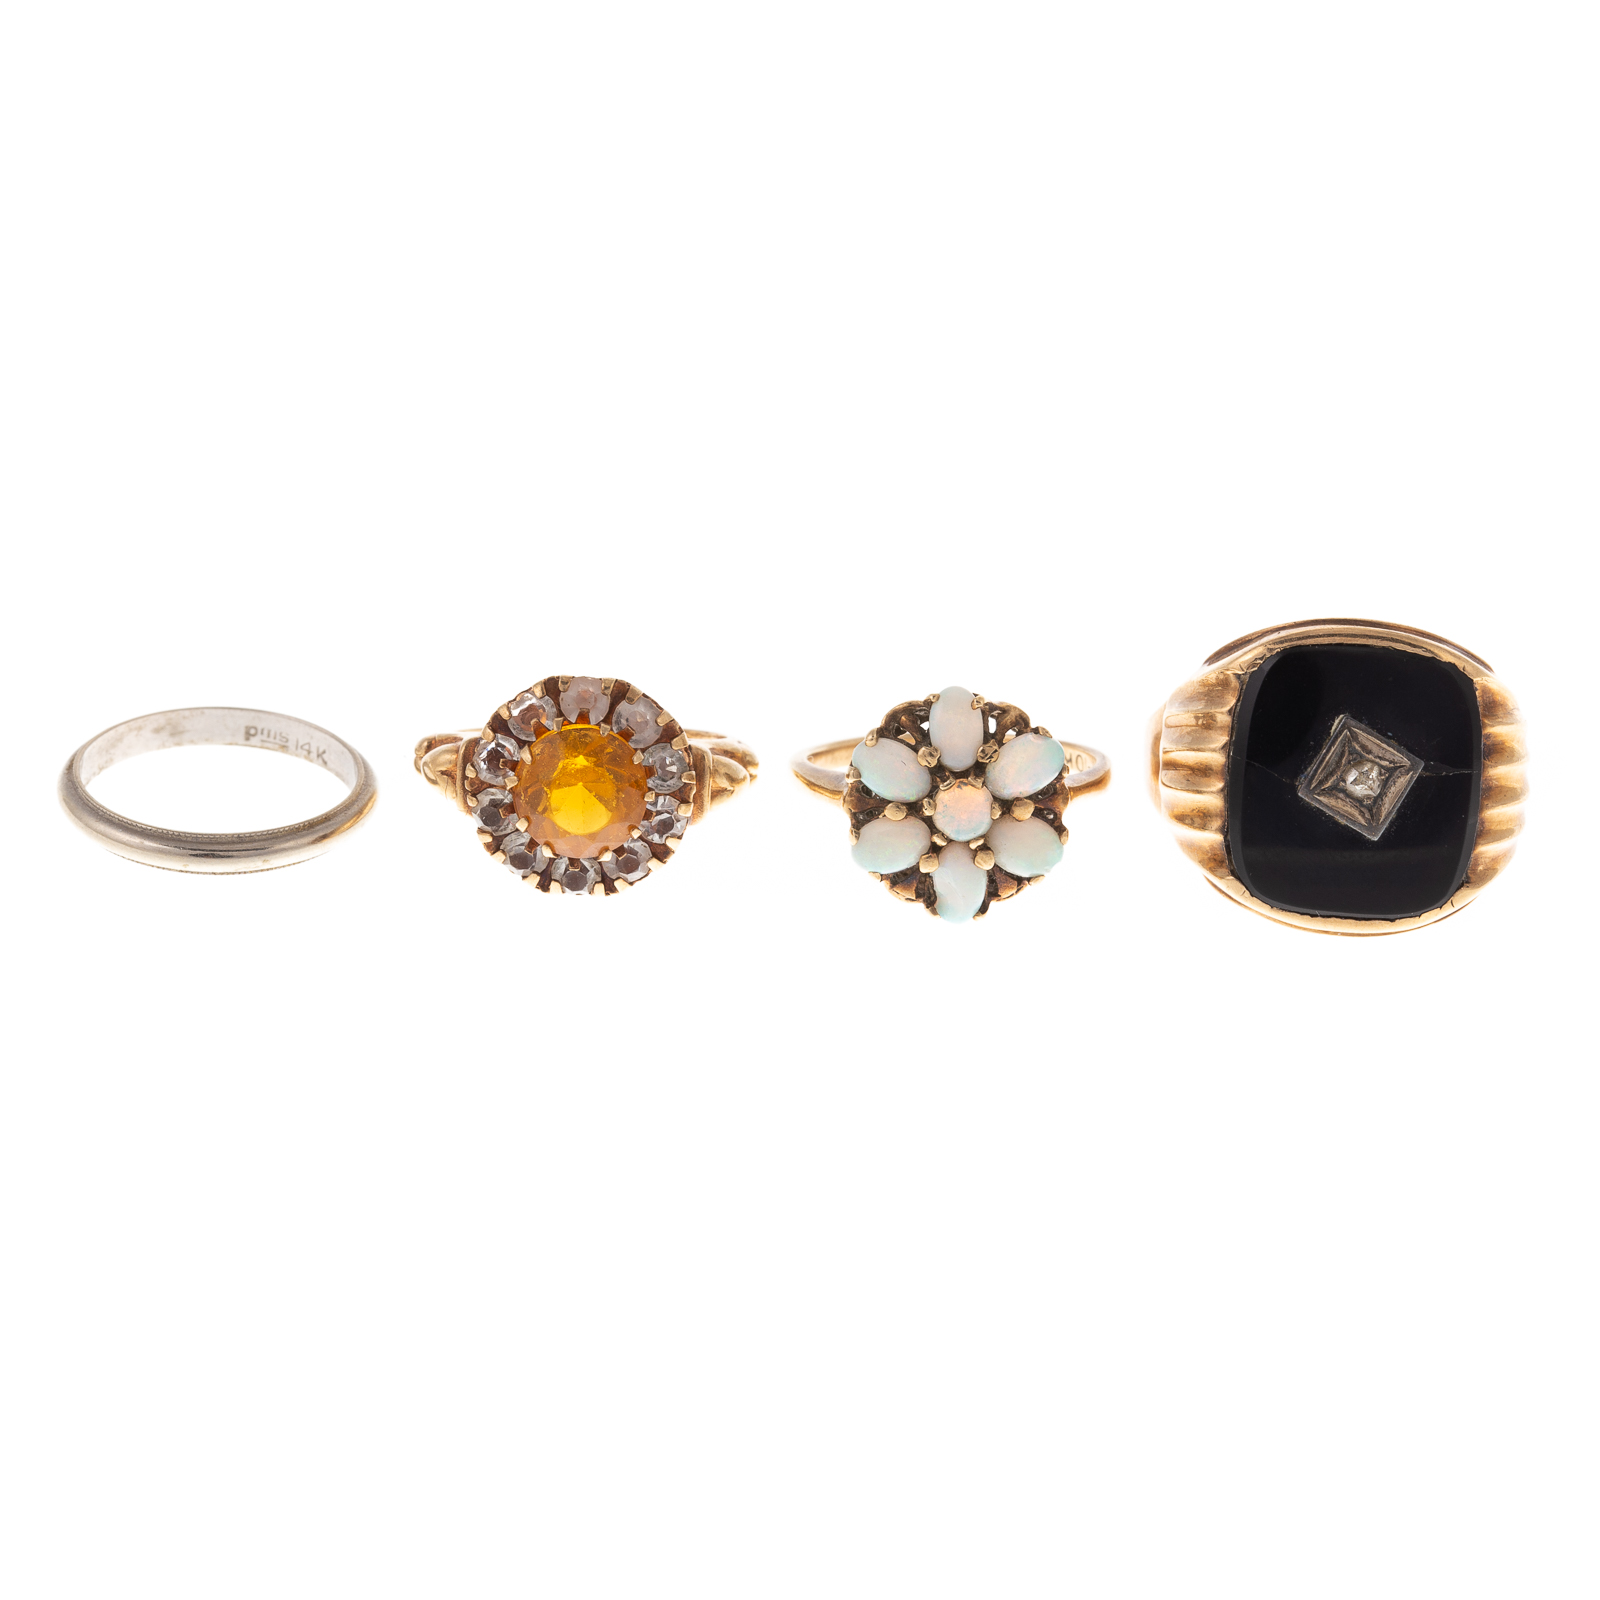 A COLLECTION OF VINTAGE RINGS IN 29e012